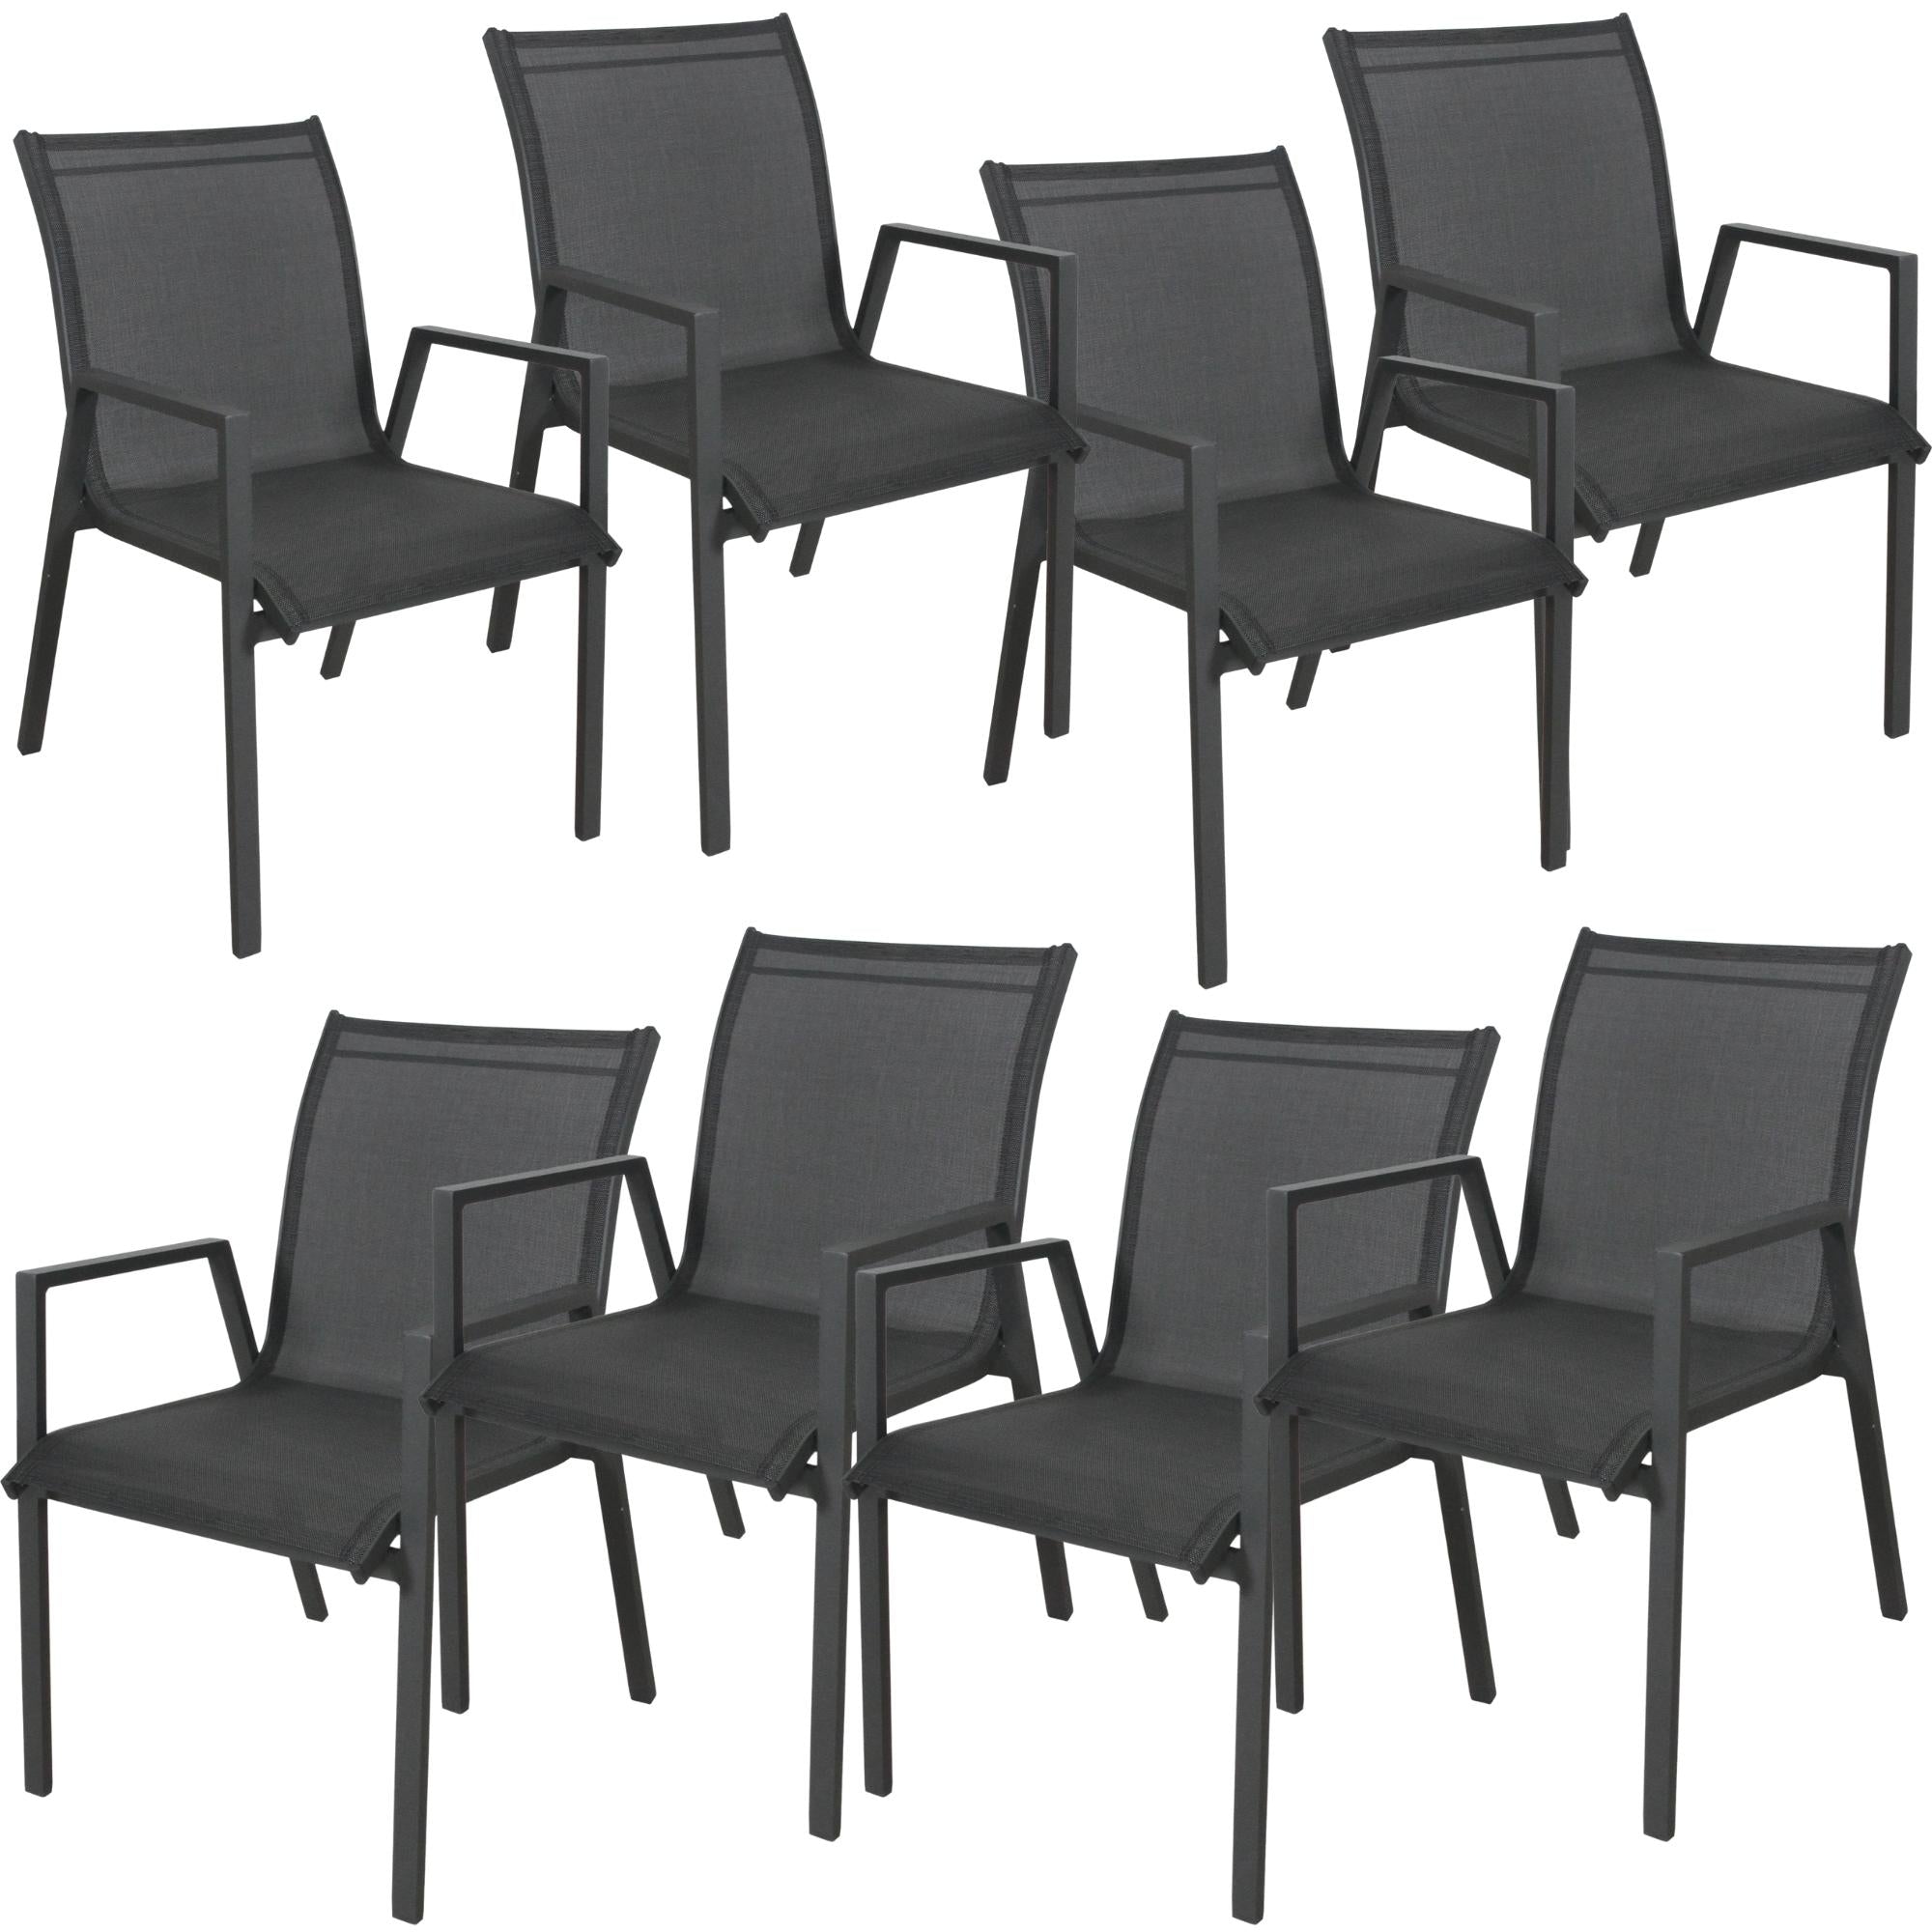 8pc Aluminium Outdoor Dining Chair Set, Stackable, Charcoal